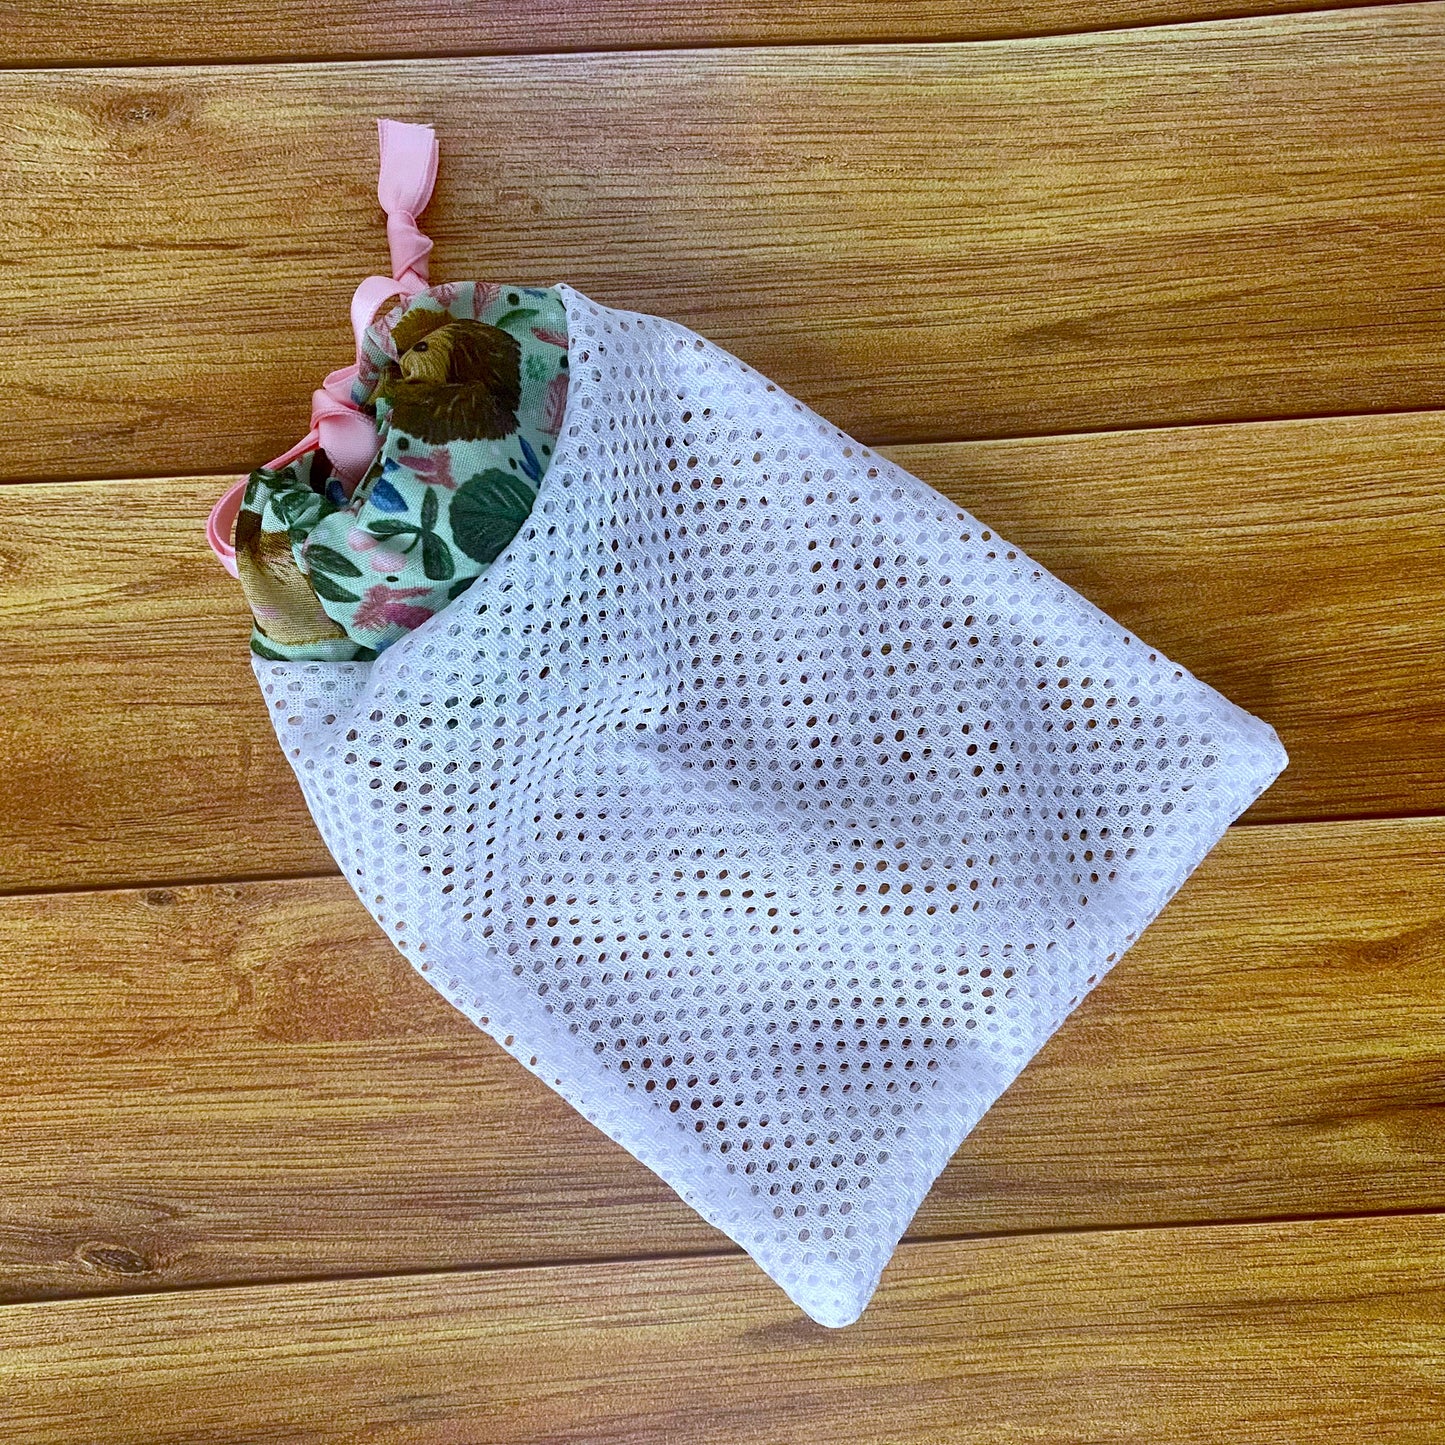 Charming hedgehog-themed drawstring makeup bag, perfect for sustainable skincare routines and organizing beauty essentials.